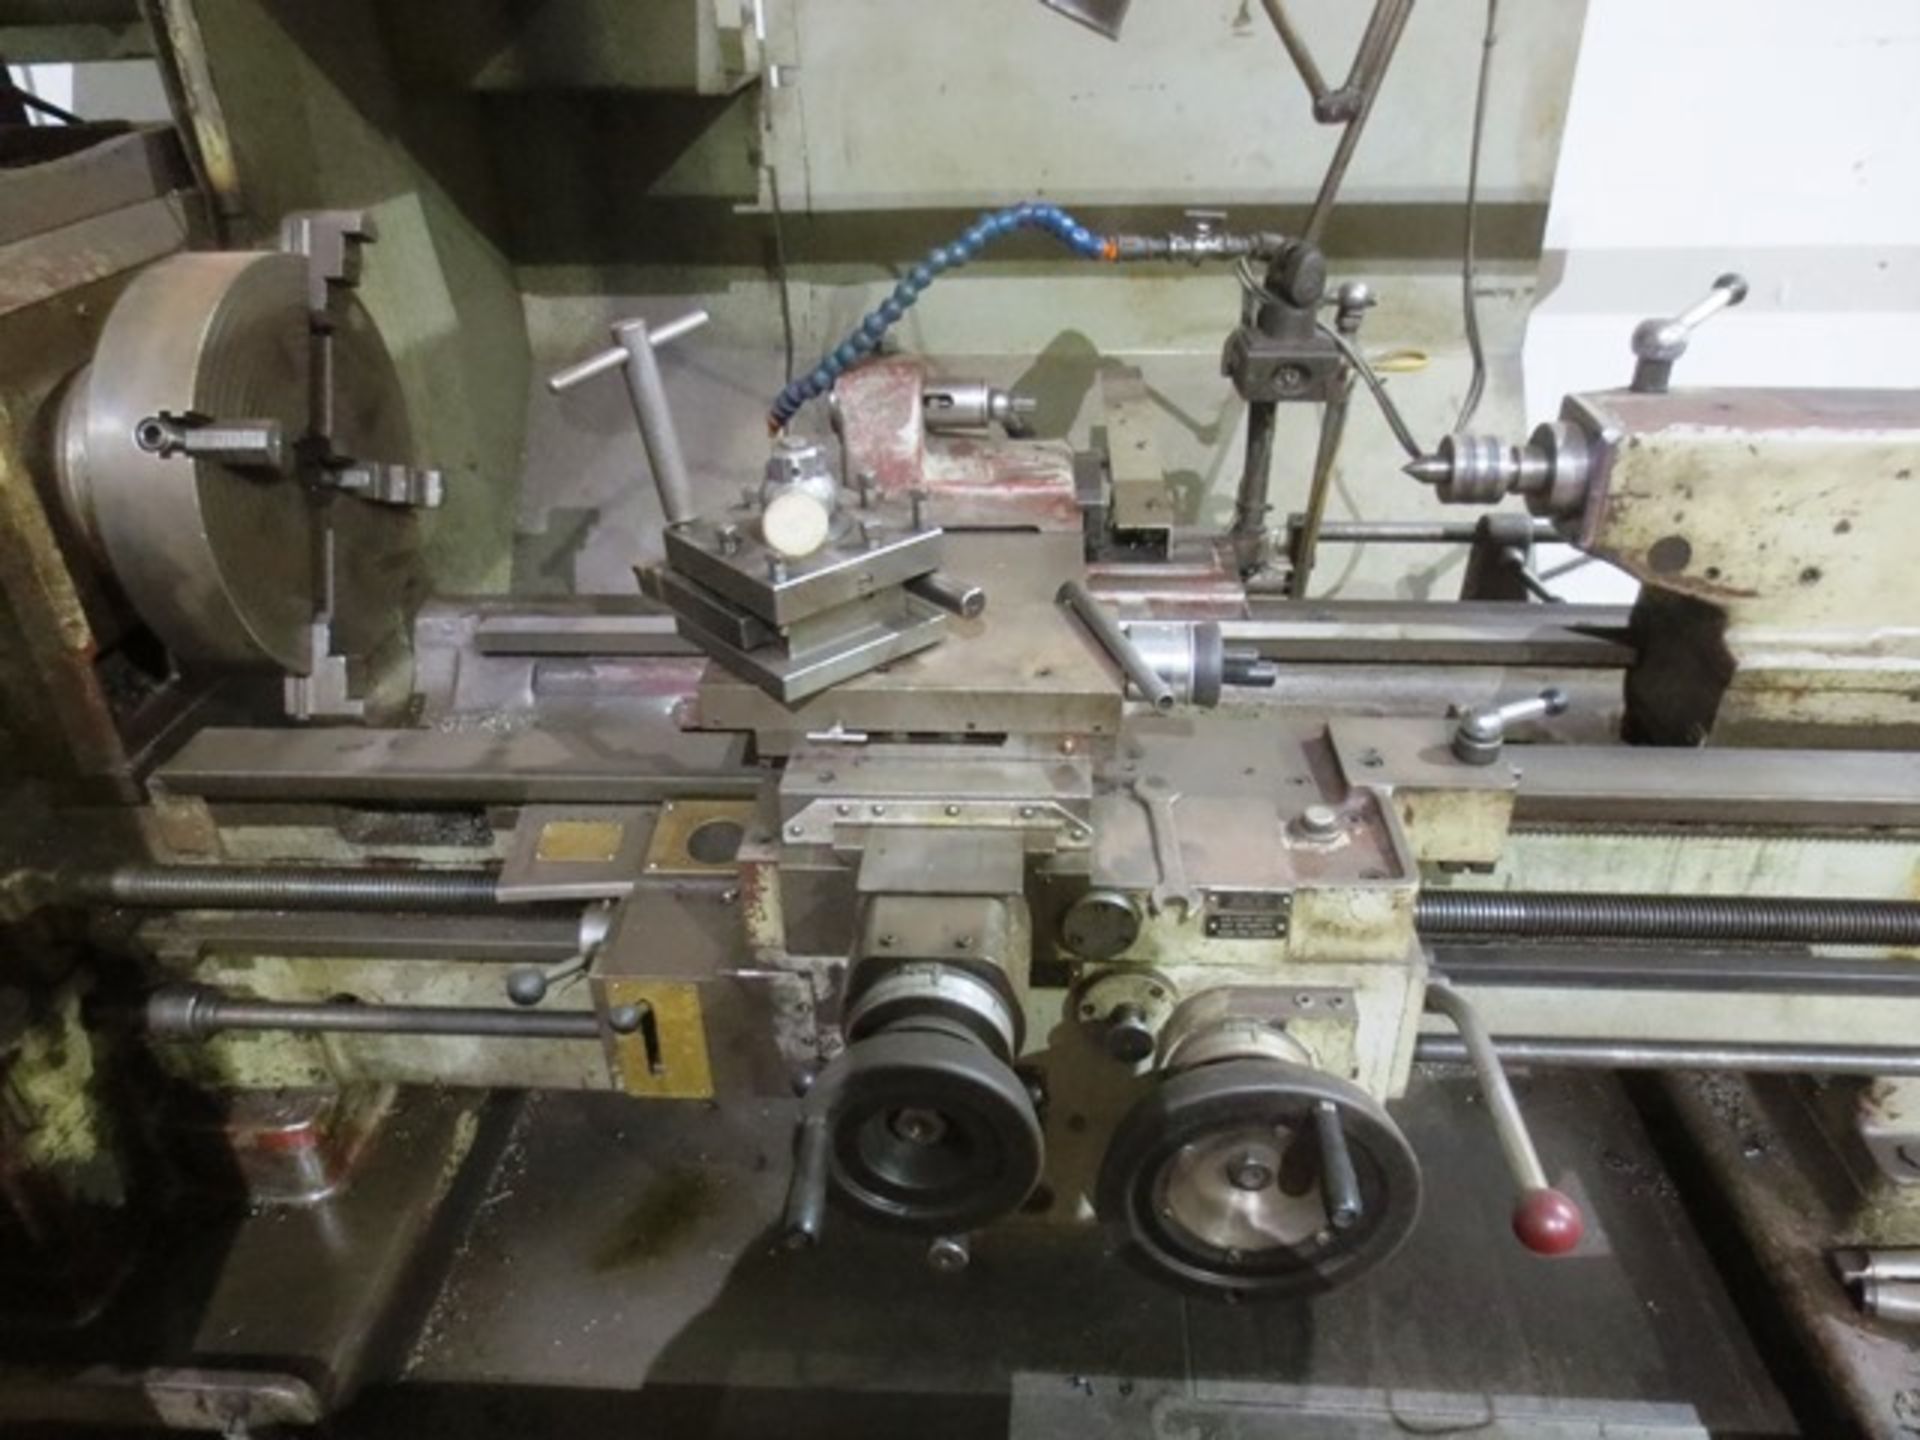 Dean Smith & Grace gap bed SS & SC centre lathe, type 1709 x 60, serial no: 41771-4-83, 4 way tool - Image 6 of 8